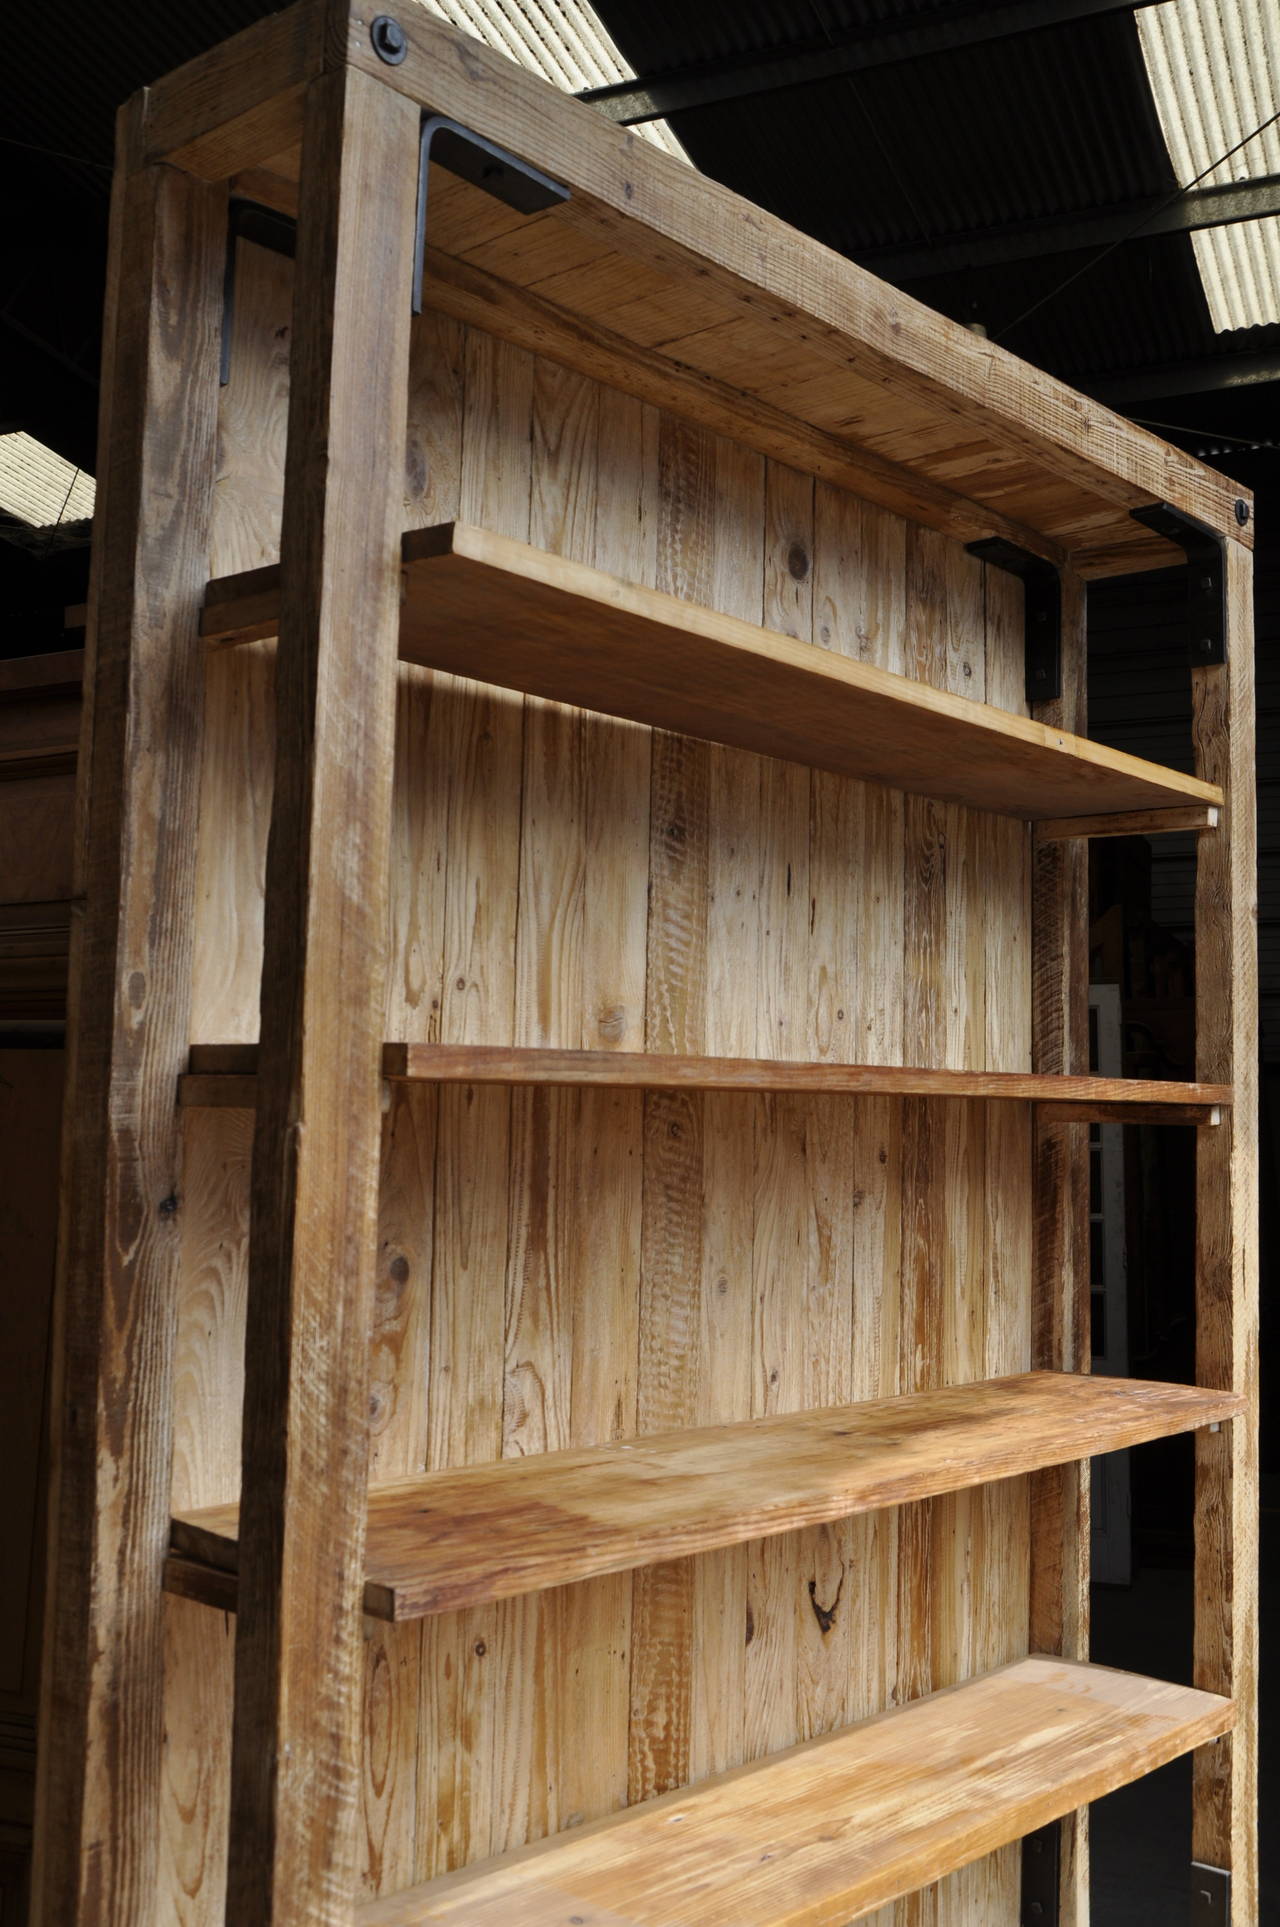 Rustic Antique Wooden Shelf With Bottom Drawers